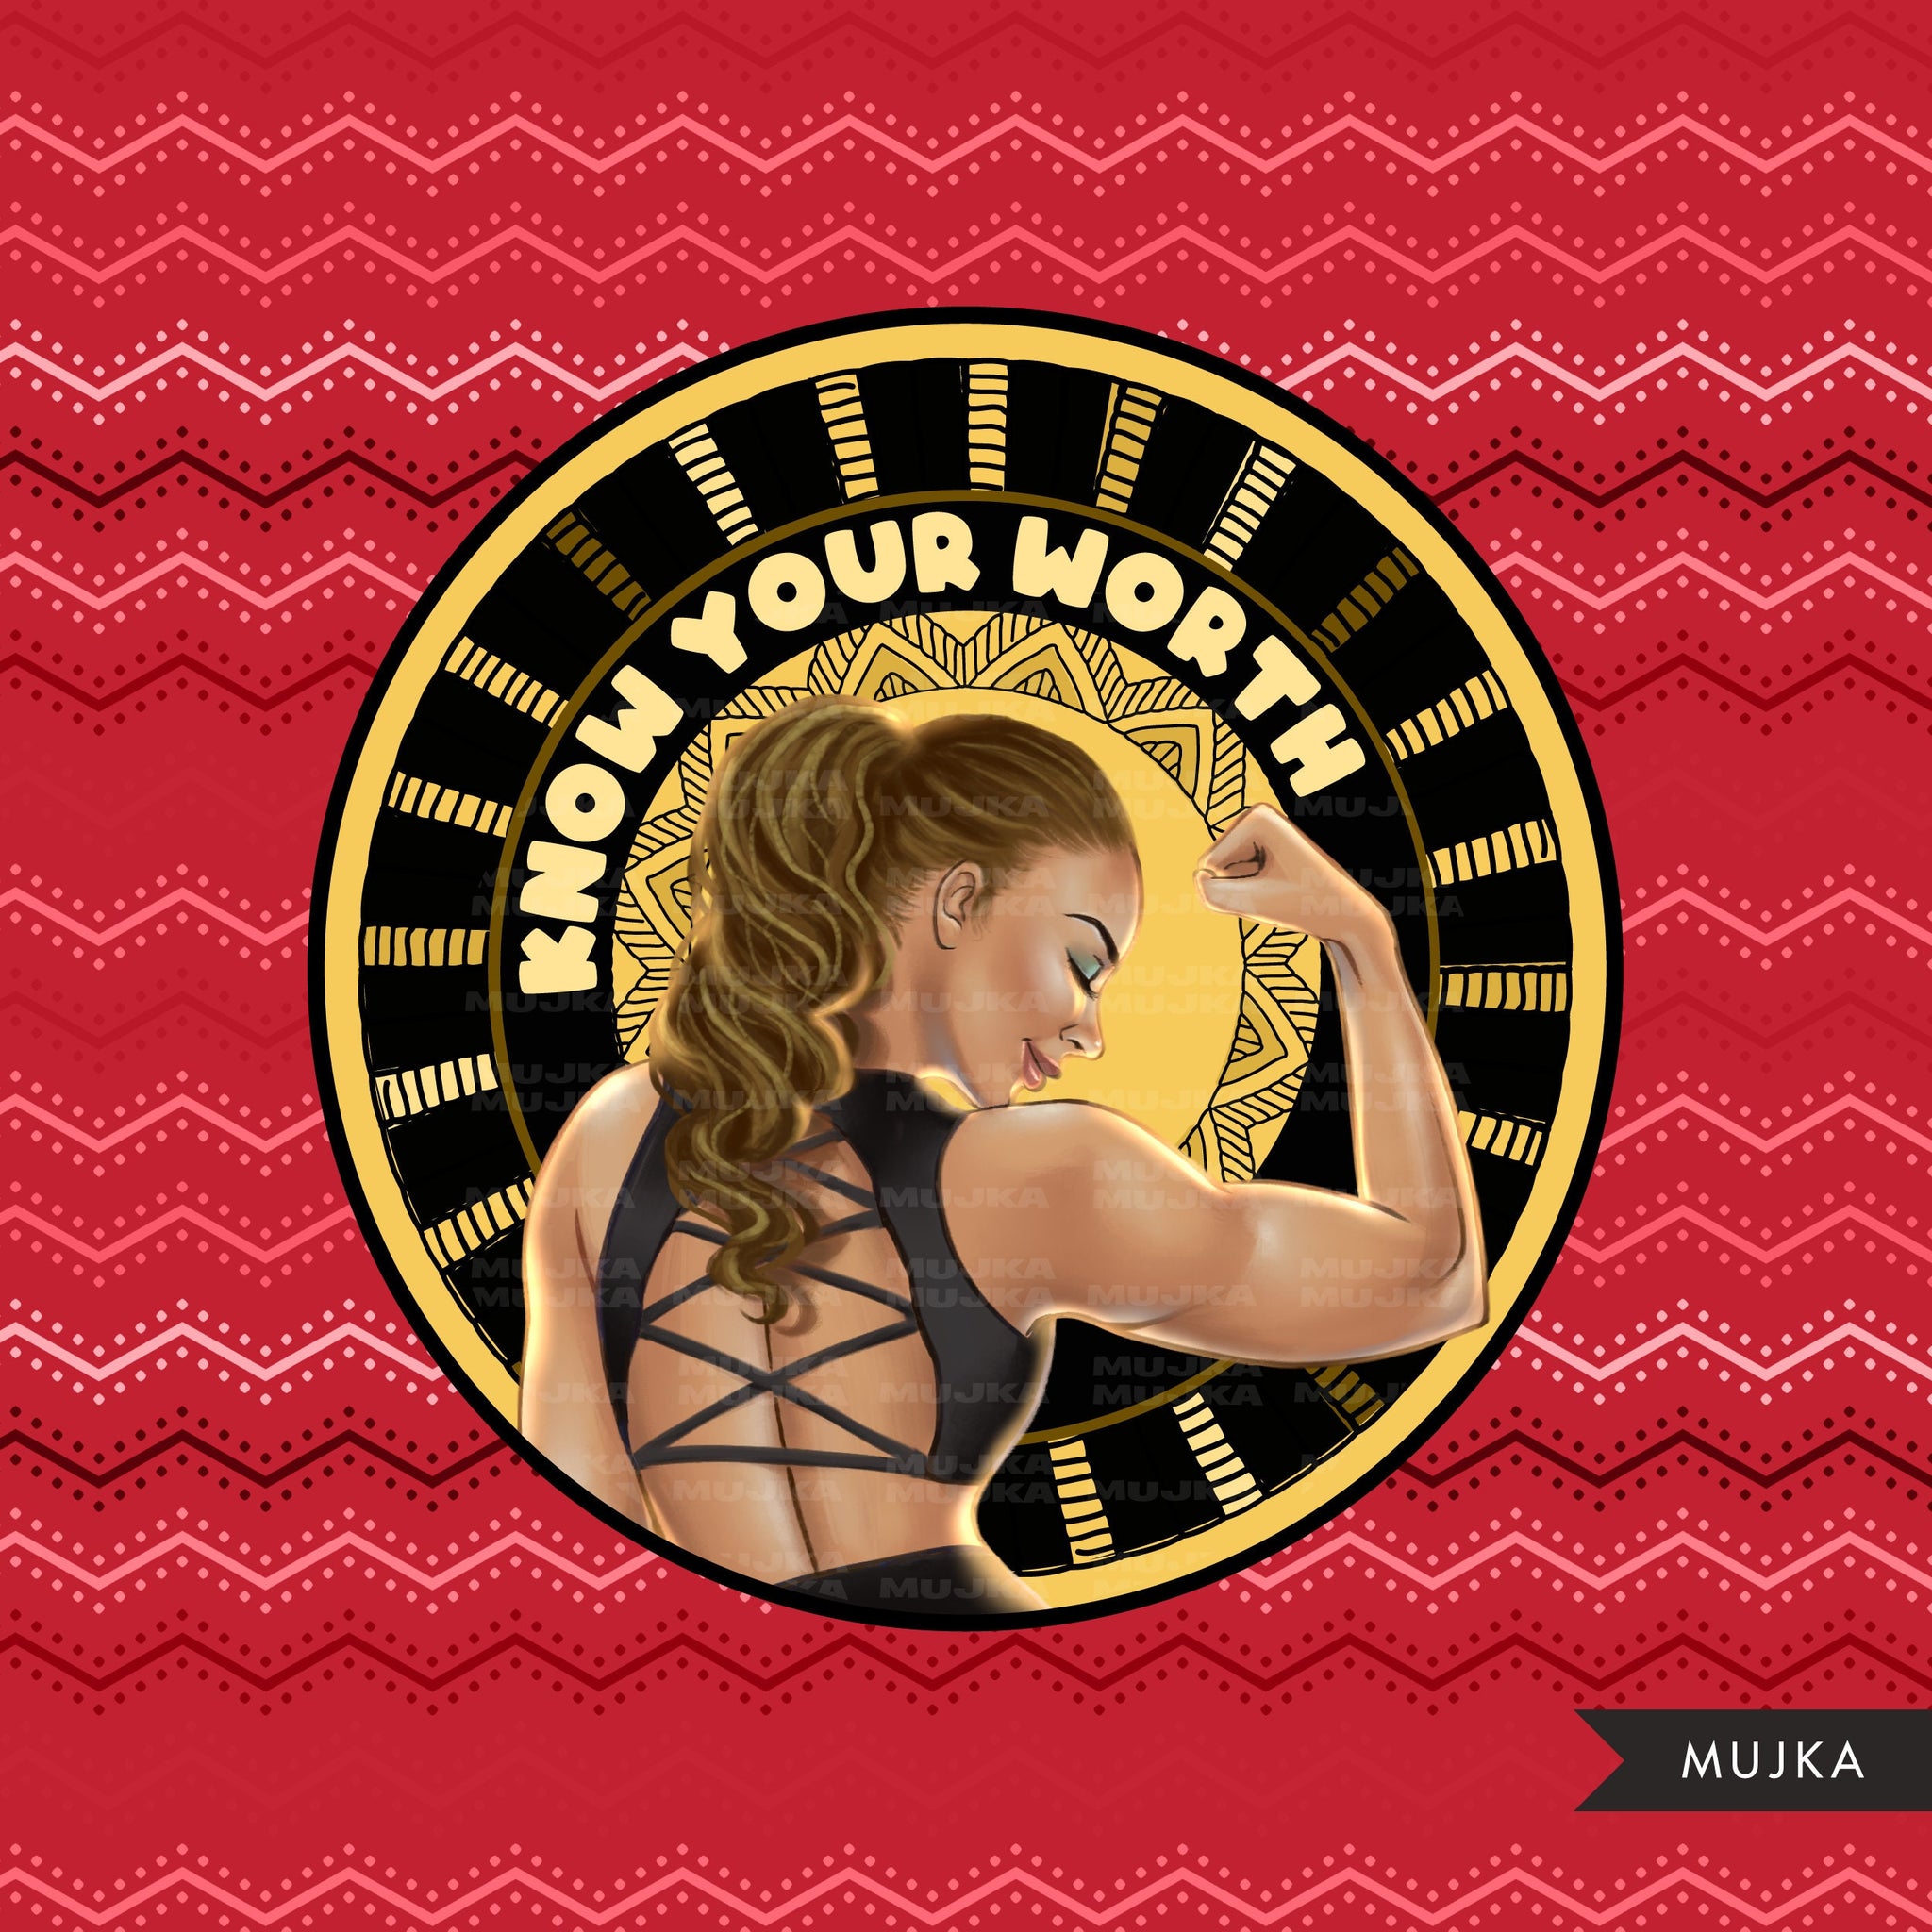 Know your worth png, Fashion doll png, Black woman png clipart, boss babe png, Mandala fashion, digital doll png, digital sublimation design